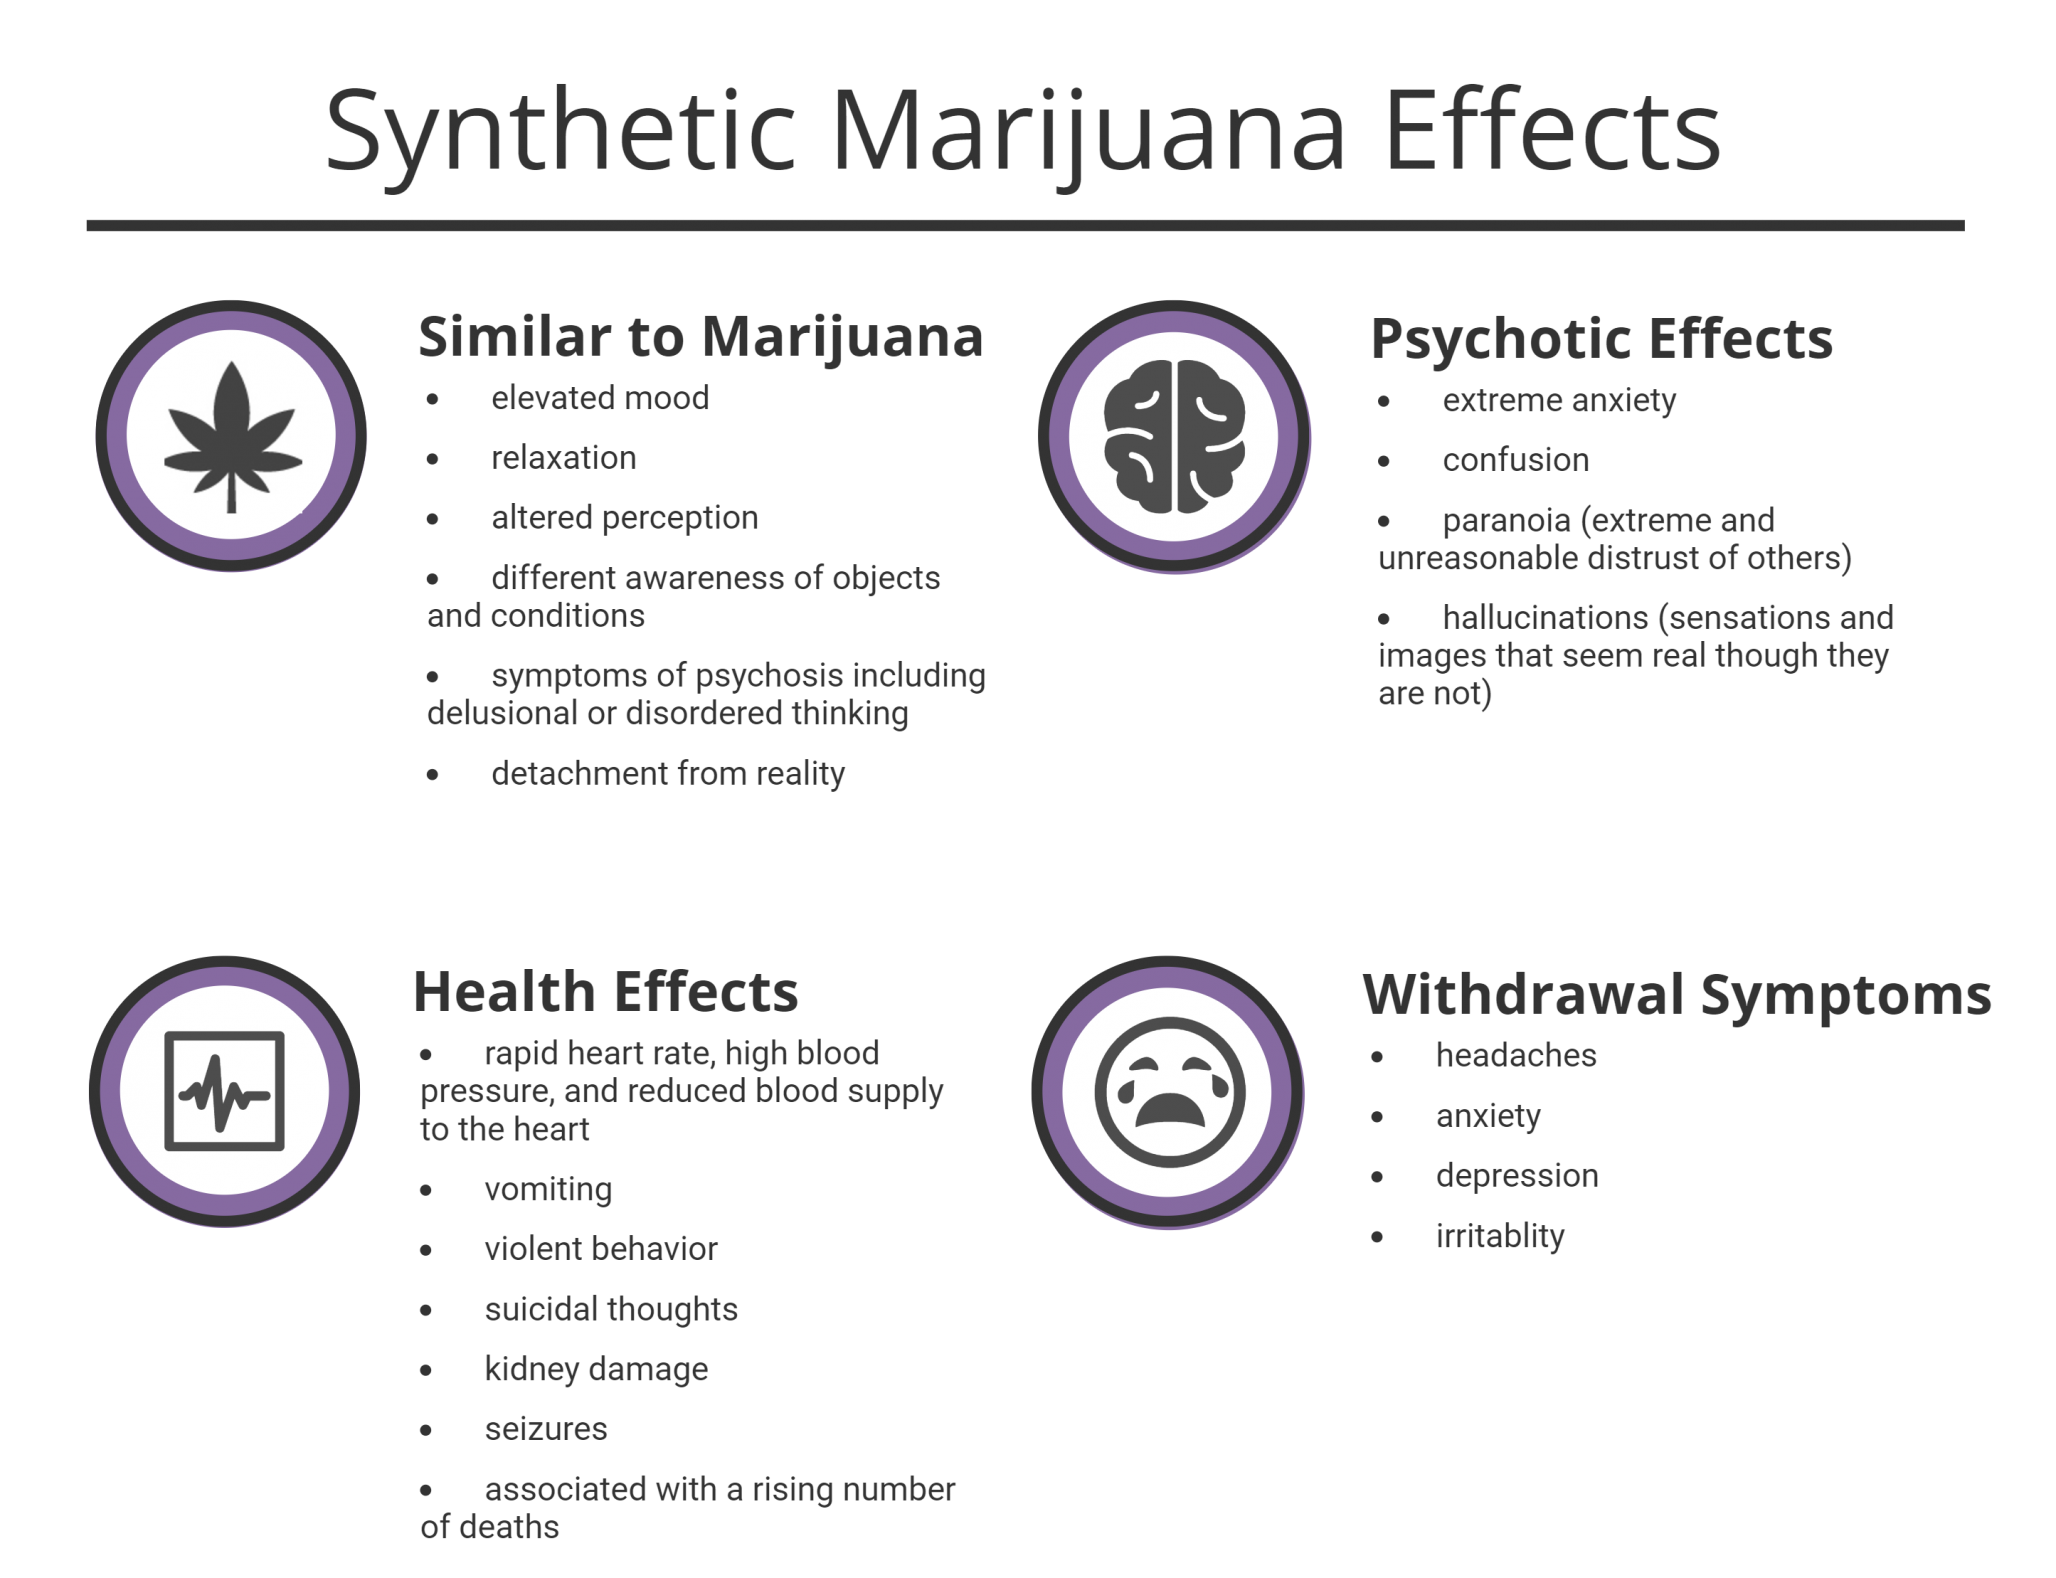 The very real dangers of synthetic cannabis